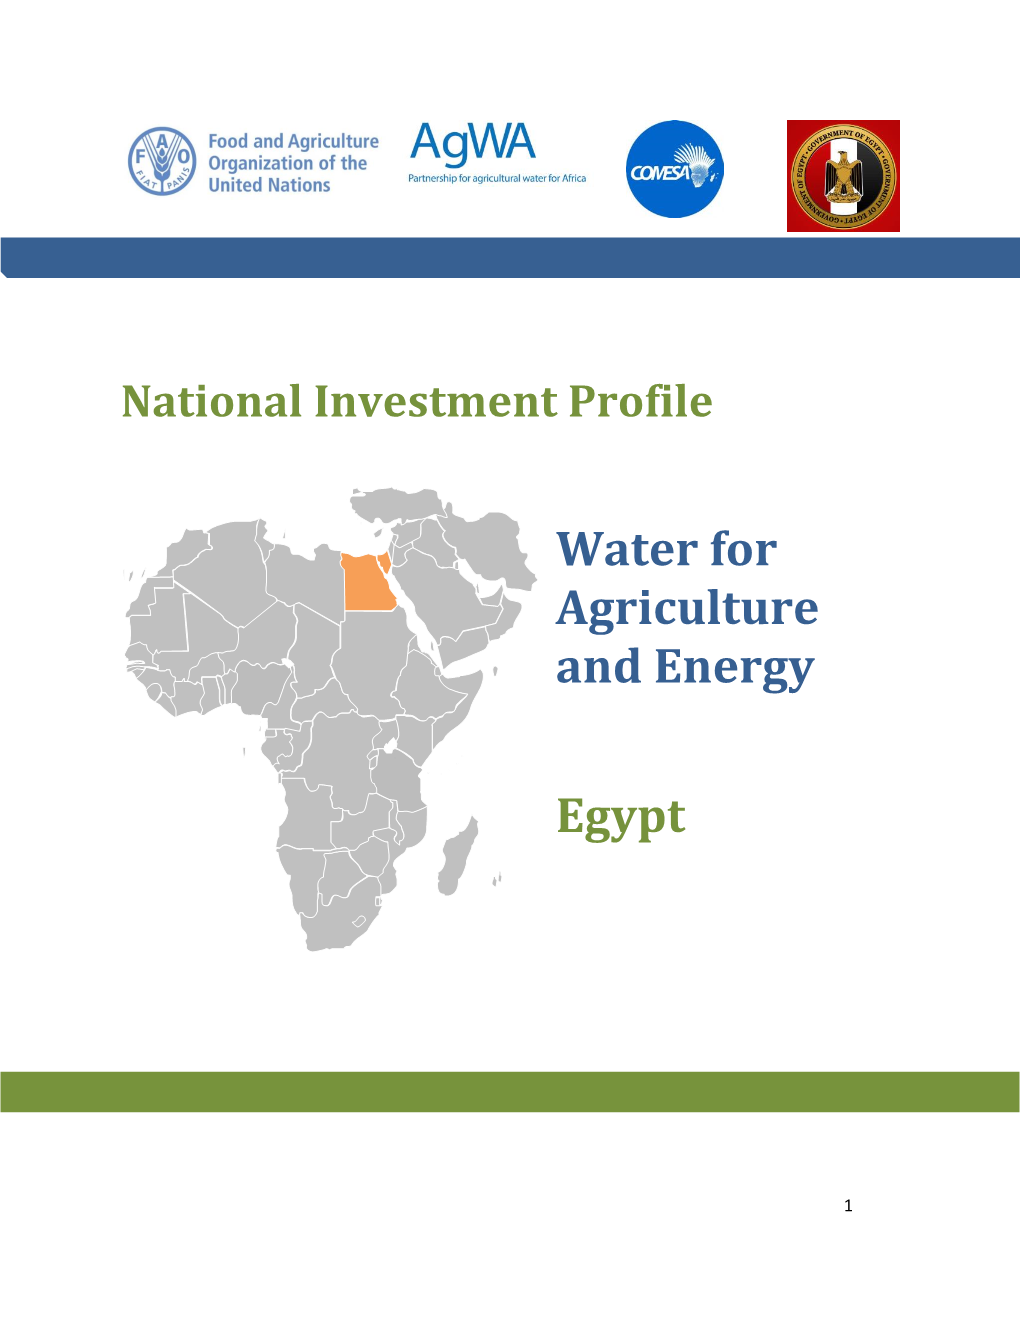 National Investment Profile. Water for Agriculture and Energy: Egypt